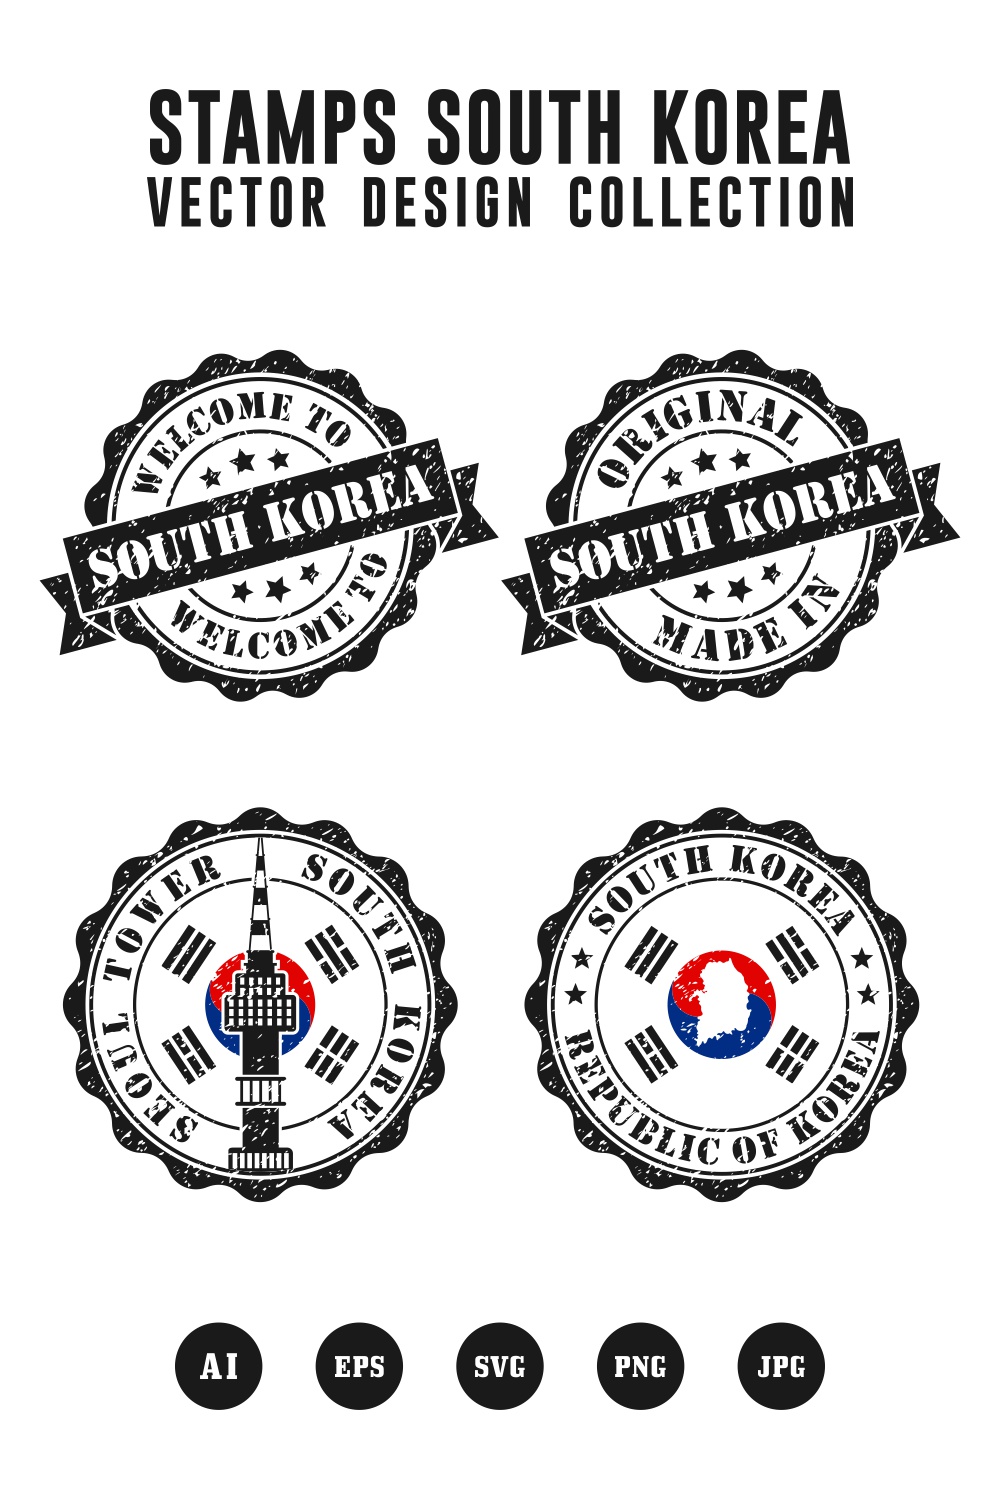 welcome to Seoul South Korea Stamps vector logo collection - $4 pinterest preview image.